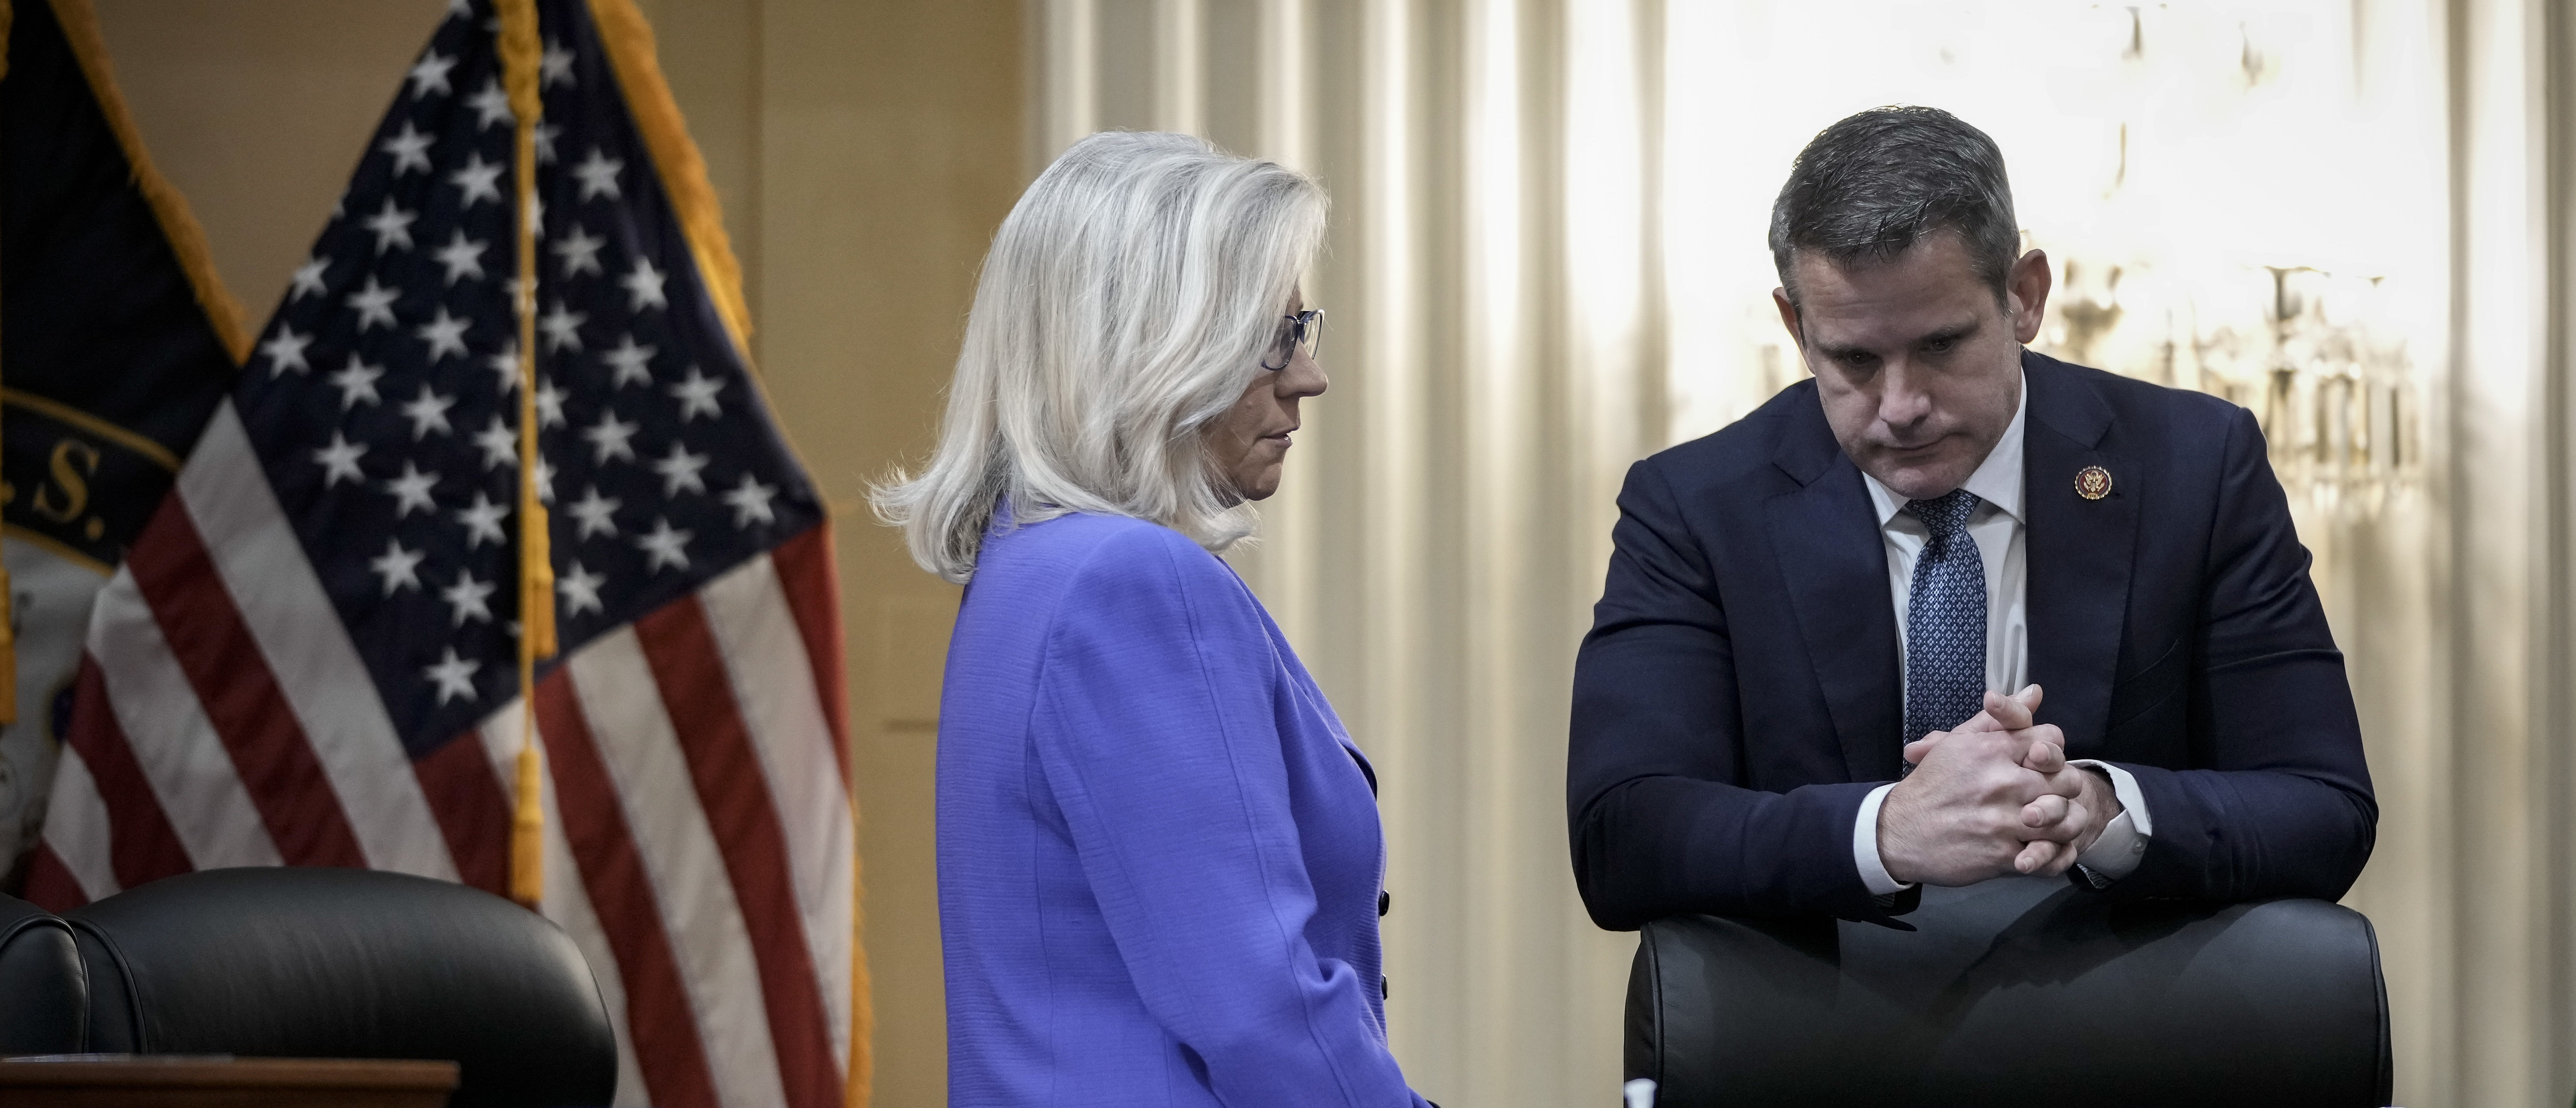 WASHINGTON, DC - JUNE 9: (L-R) Rep. Liz Cheney (R-WY) and Rep. Adam Kinzinger (R-IL) confer during a break in the hearing of the Select Committee to Investigate the January 6th Attack on the U.S. Capitol in the Cannon House Office Building on June 9, 2022 in Washington, DC. The bipartisan committee, which has been gathering evidence related to the January 6 attack at the U.S. Capitol for almost a year, will present its findings in a series of televised hearings. On January 6, 2021, supporters of President Donald Trump attacked the U.S. Capitol Building in an attempt to disrupt a congressional vote to confirm the electoral college win for Joe Biden. (Photo by Drew Angerer/Getty Images)